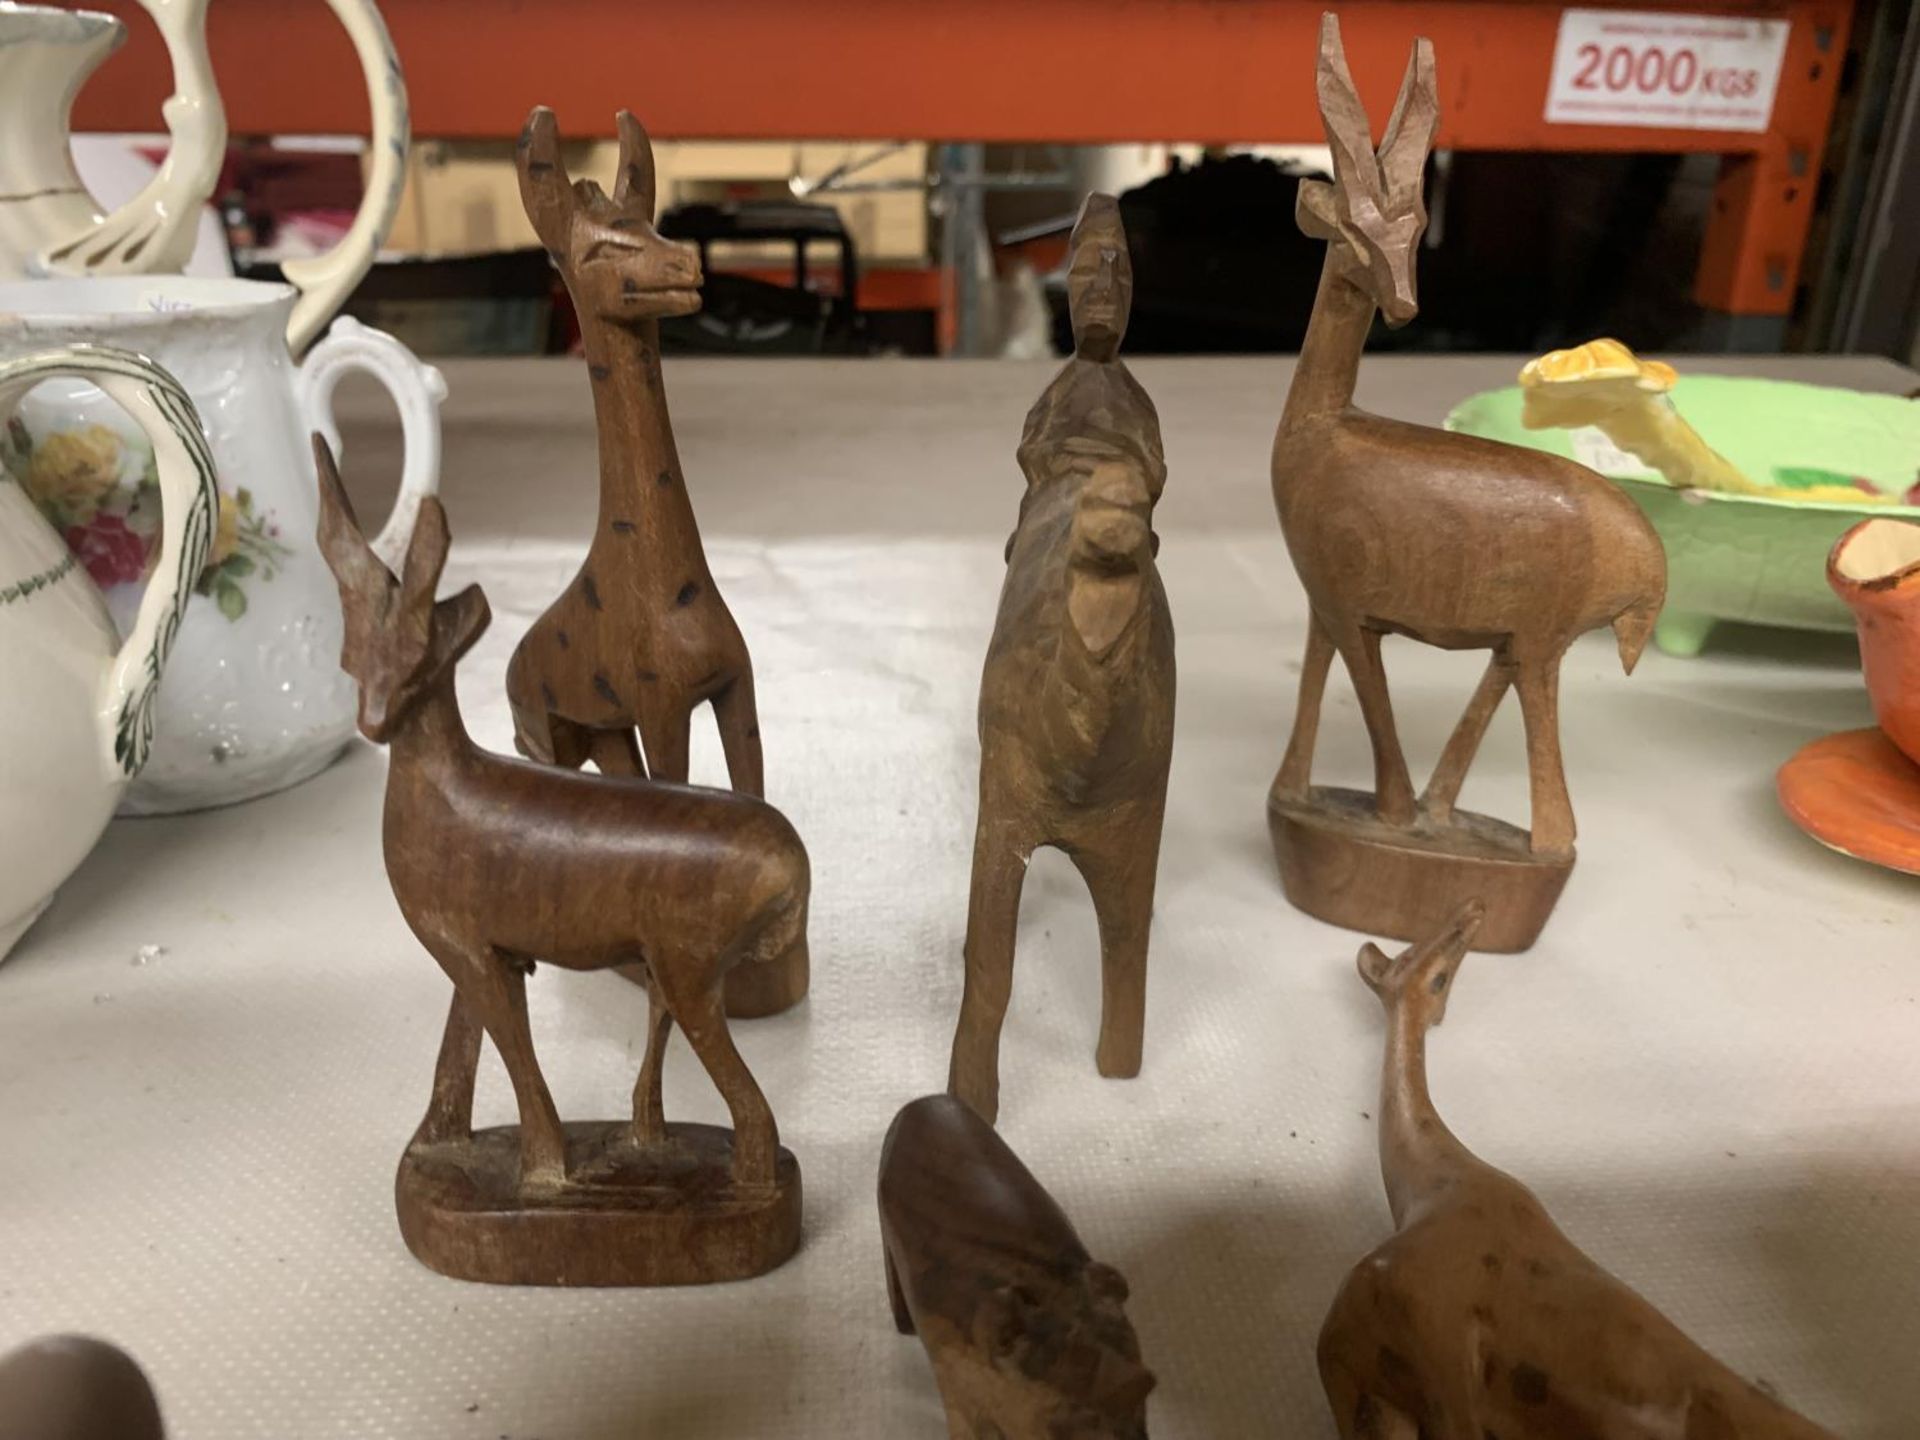 A QUANTITY OF TREEN ANIMALS TO INCLUDE GAZELLES, GIRAFFES, CAMEL, ETC PLUS TETLEY TEA COLLECTABLE - Image 4 of 4